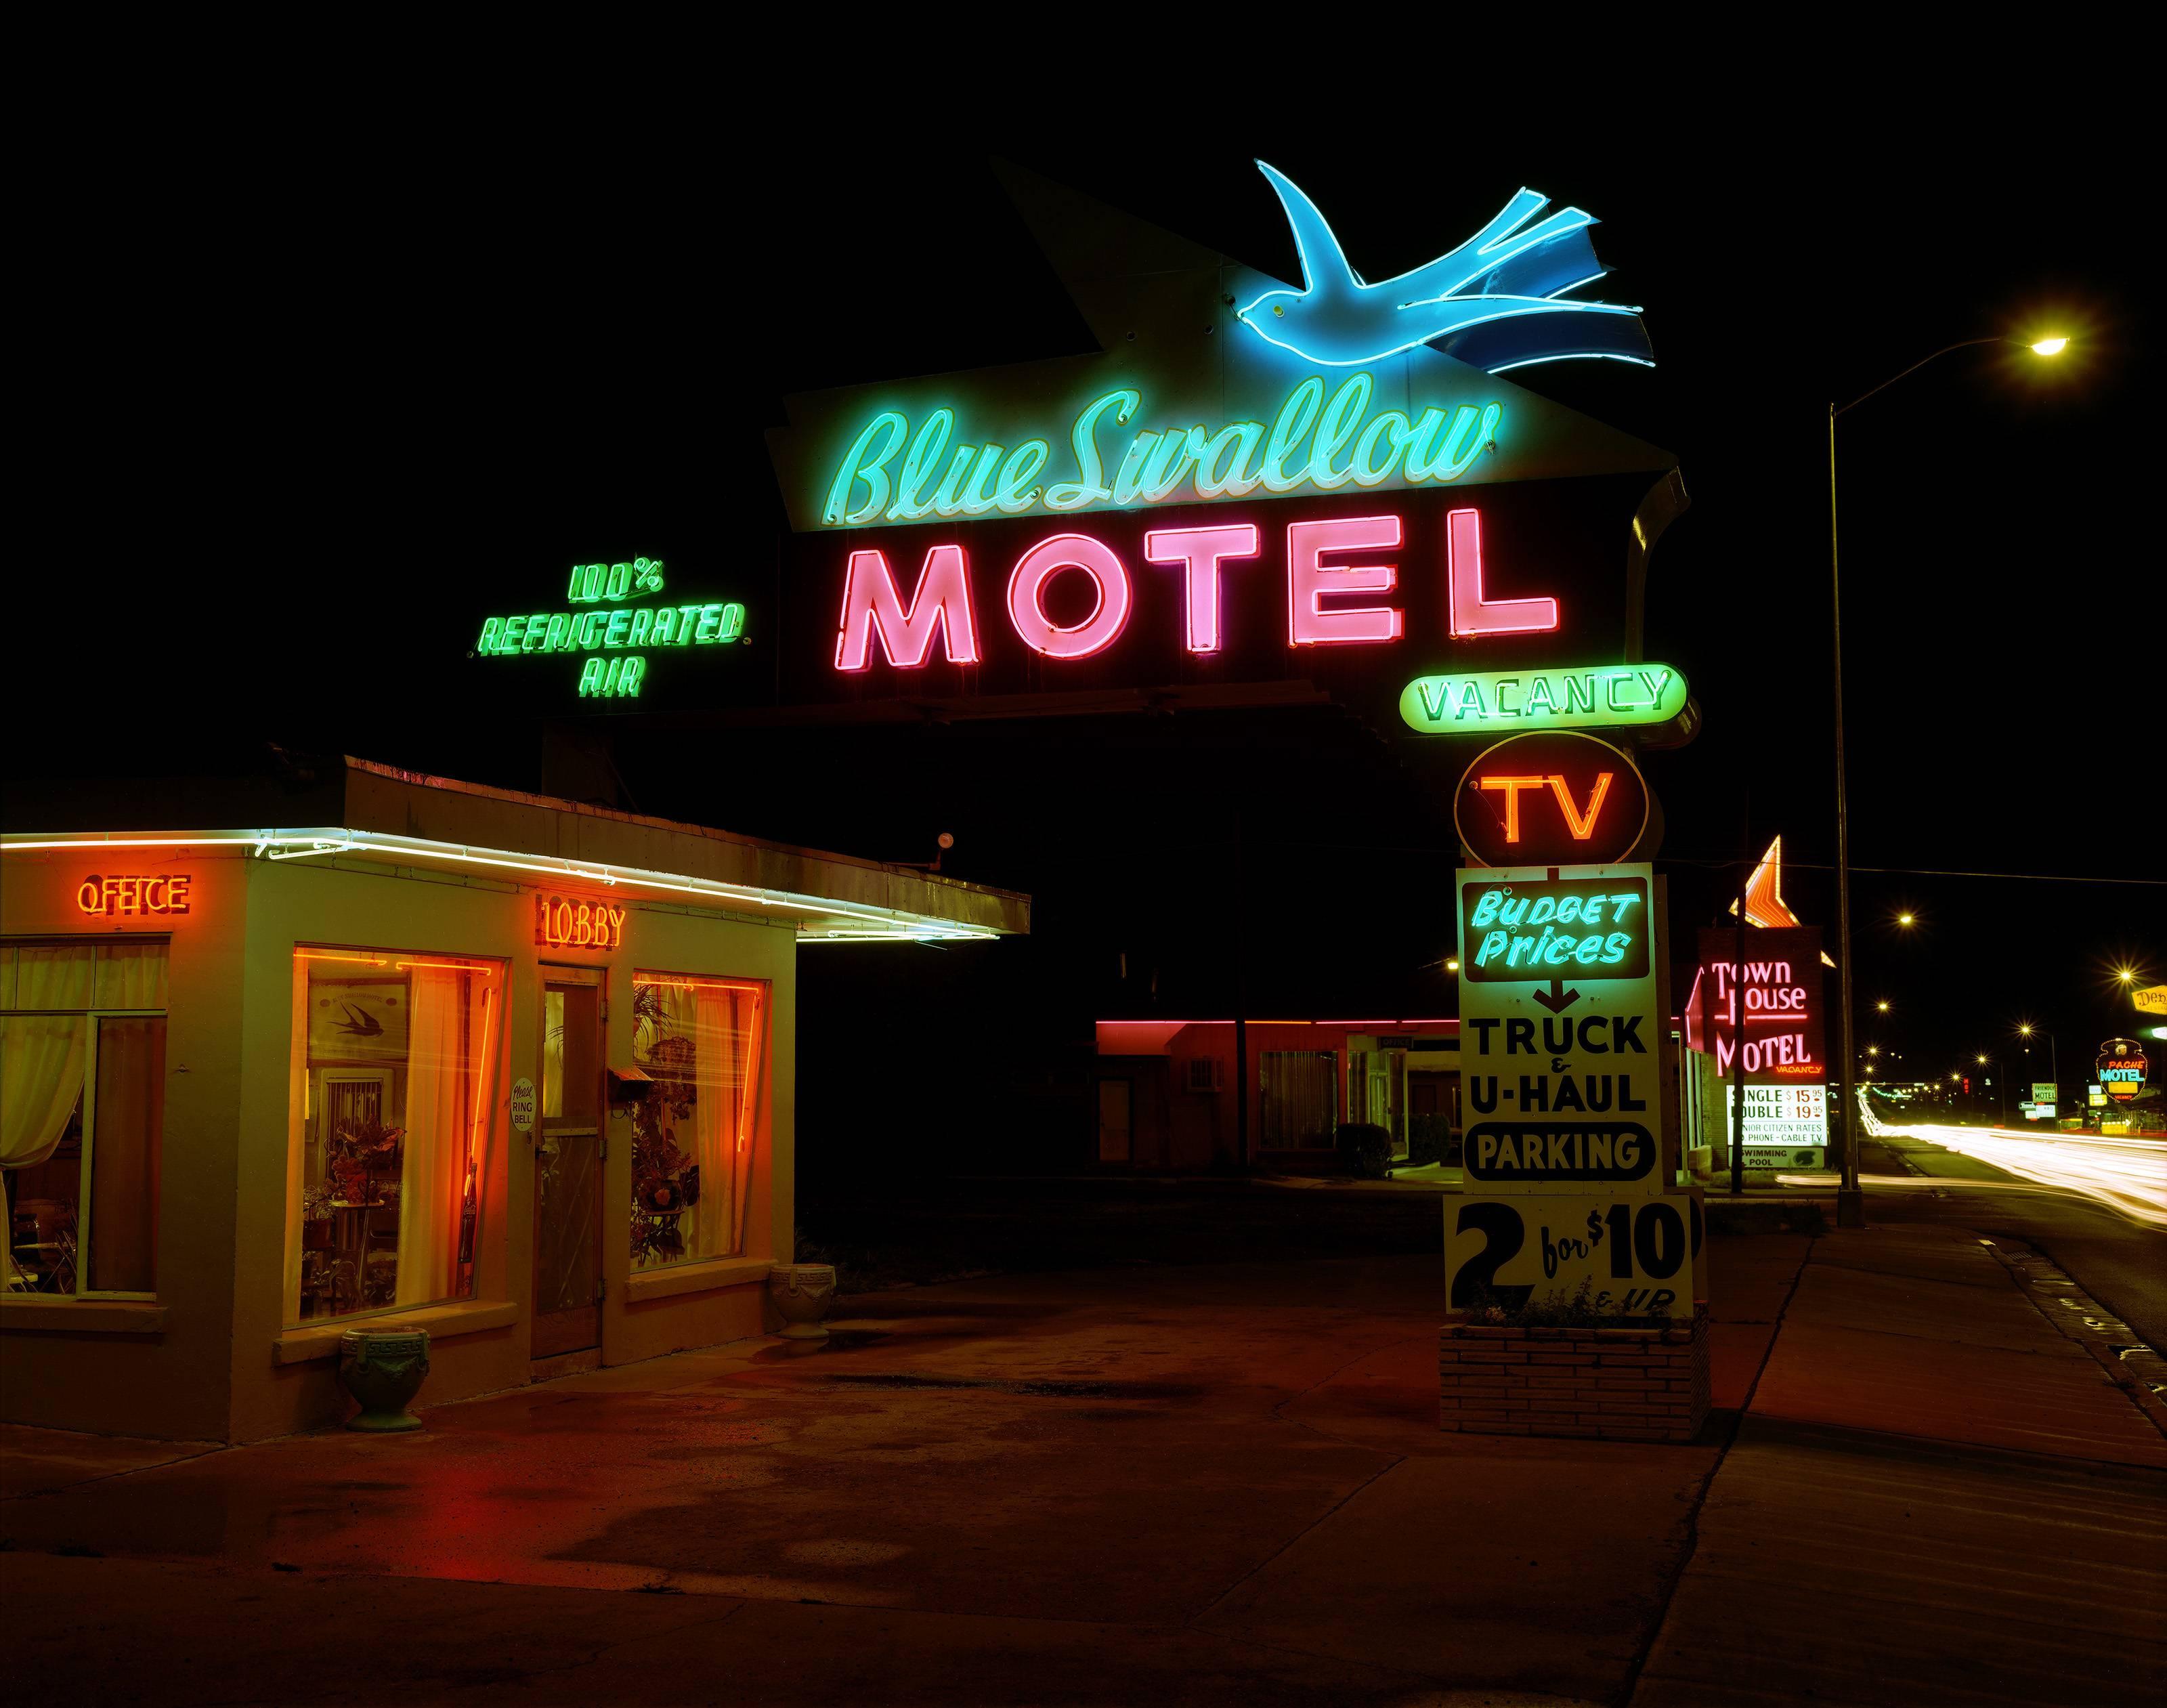 Steve Fitch Landscape Photograph - Blue Swallow Motel, Hwy.66, Tucumcari, New Mexico; July, 1990